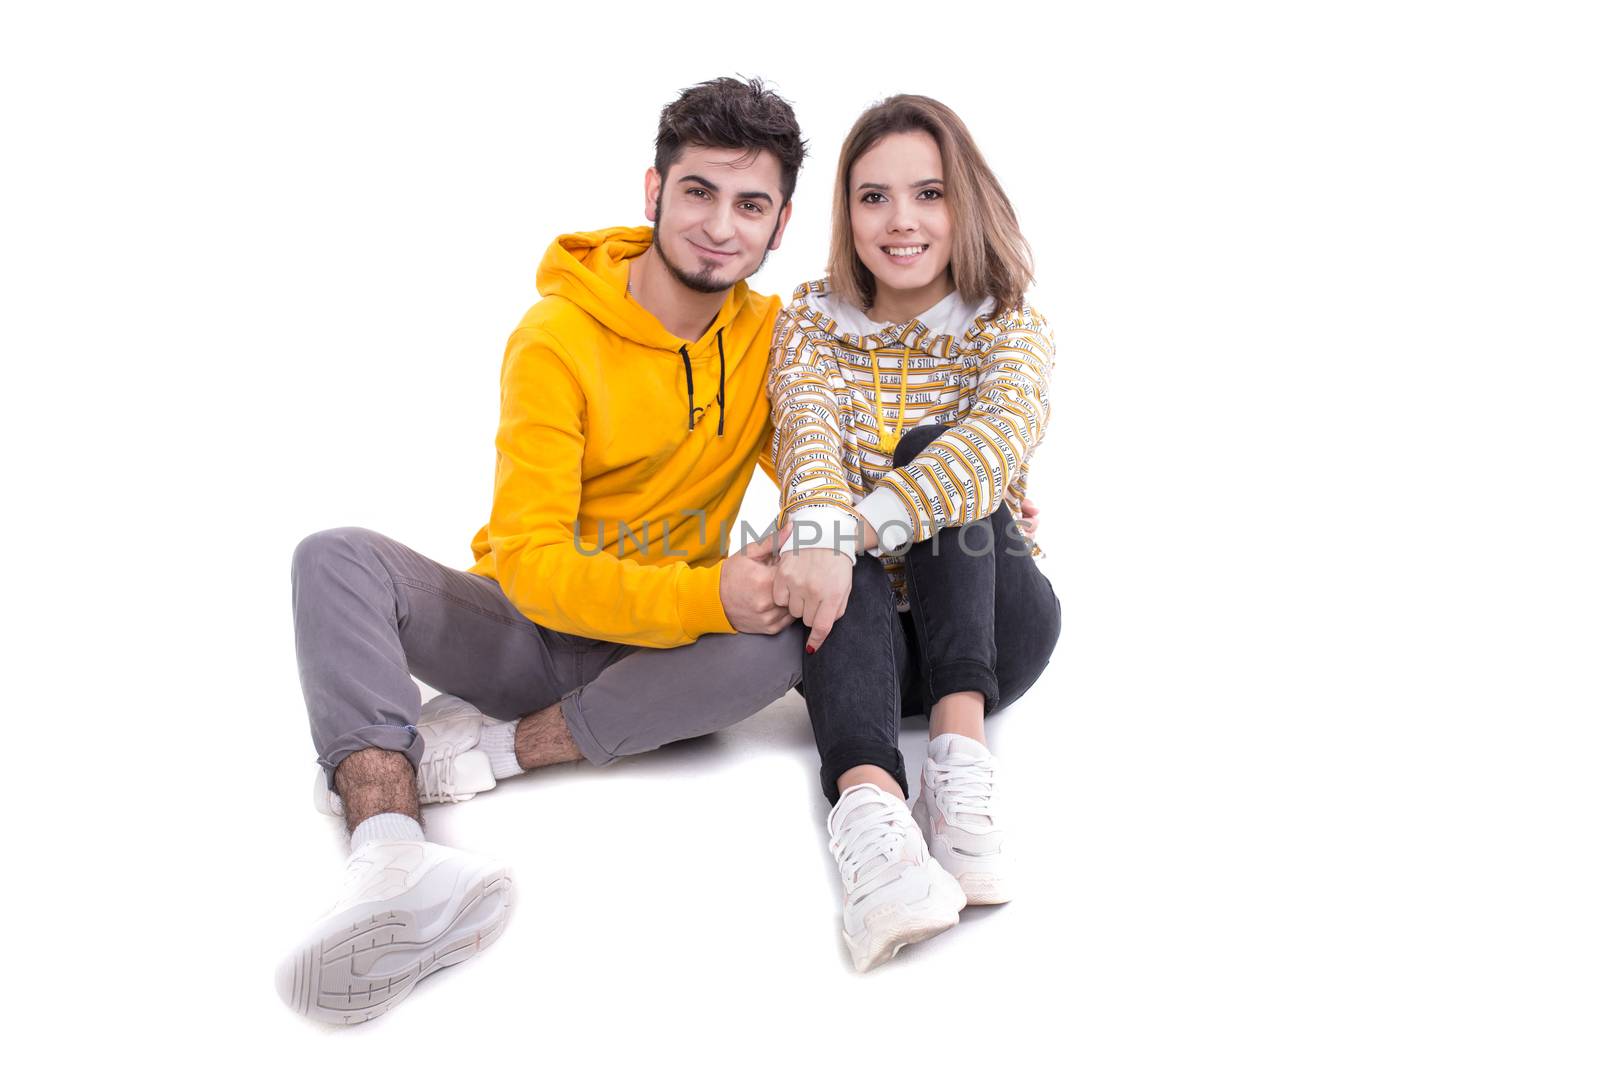 Couple in yellow sitting on white in studio by Angel_a